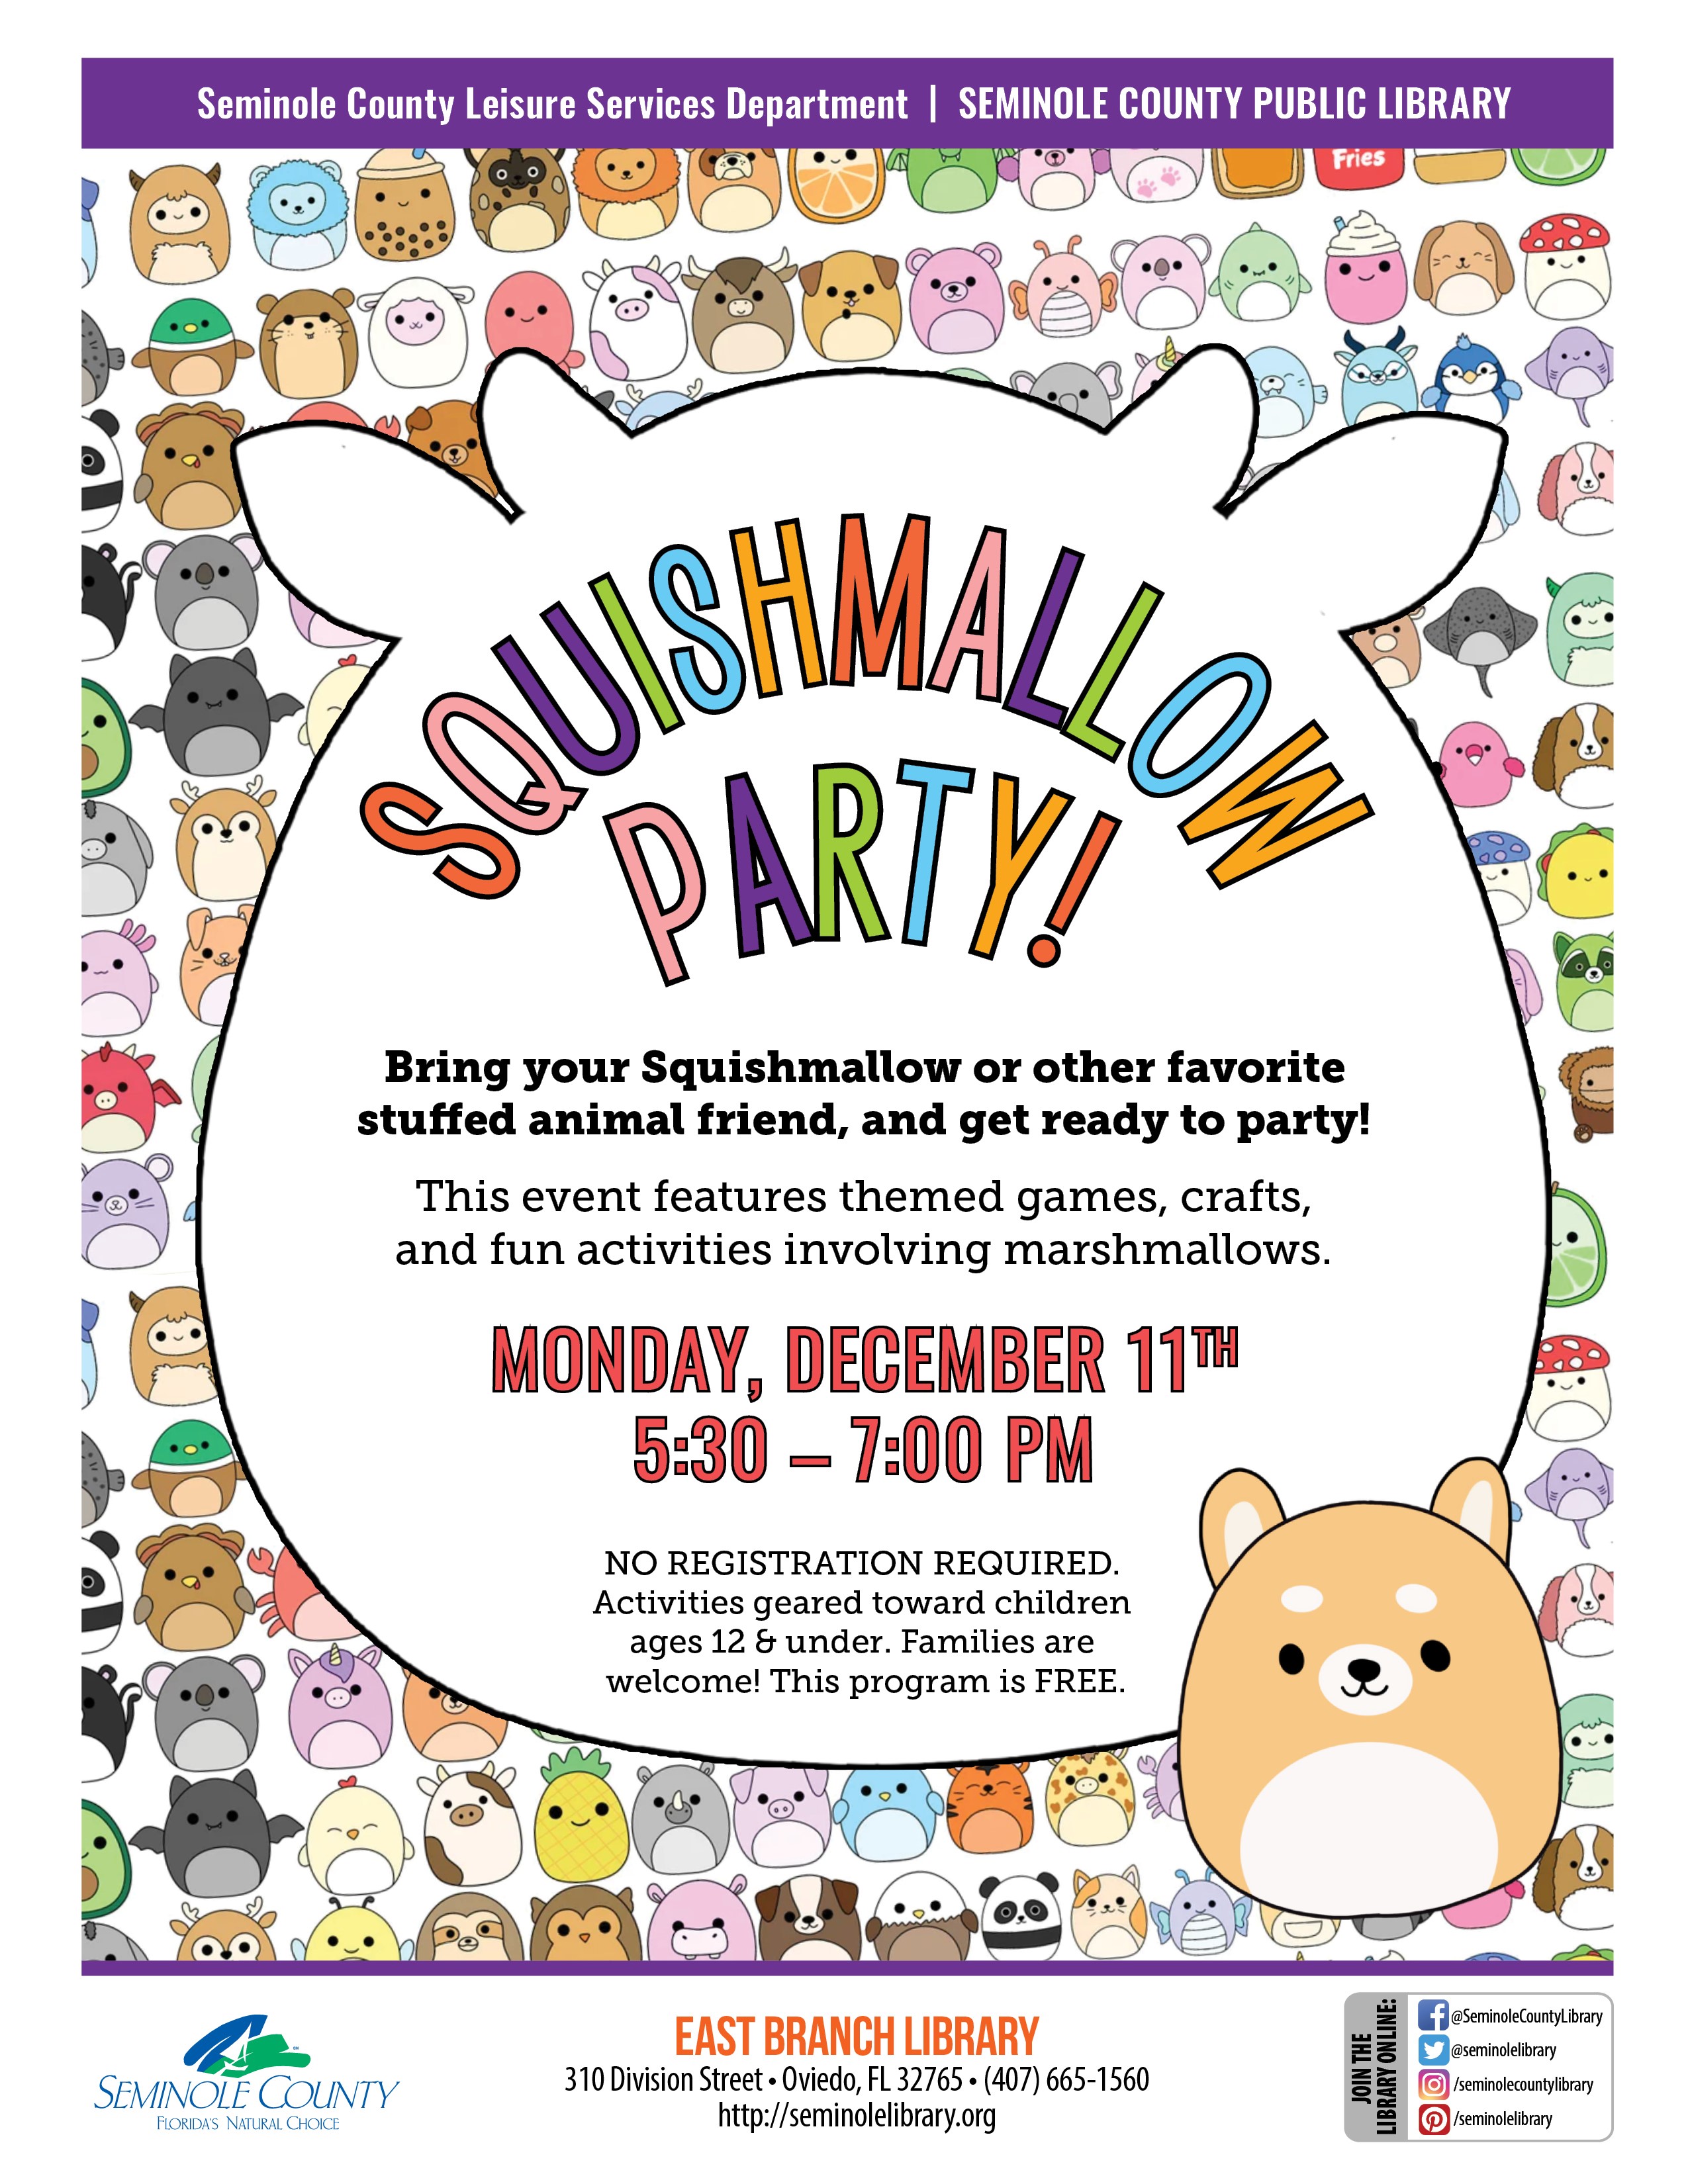 Squishmallow Party - East Branch Library